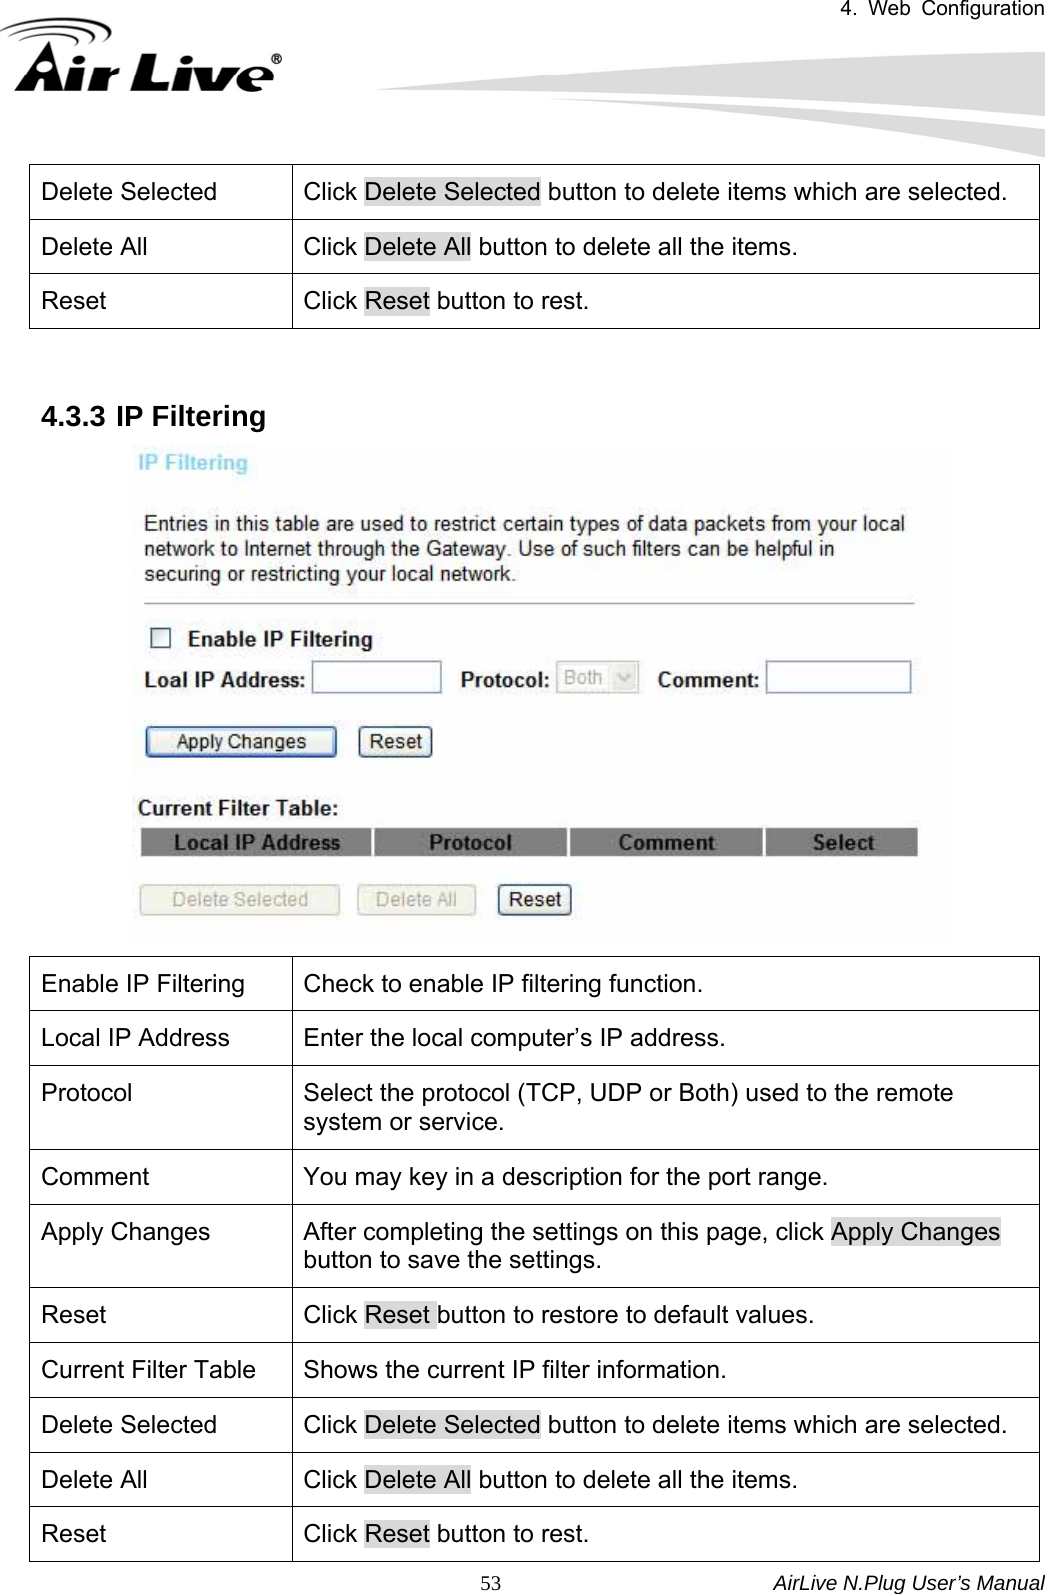 4. Web Configuration       AirLive N.Plug User’s Manual  53Delete Selected  Click Delete Selected button to delete items which are selected. Delete All  Click Delete All button to delete all the items. Reset  Click Reset button to rest.   4.3.3 IP Filtering  Enable IP Filtering  Check to enable IP filtering function. Local IP Address  Enter the local computer’s IP address. Protocol  Select the protocol (TCP, UDP or Both) used to the remote system or service. Comment  You may key in a description for the port range. Apply Changes  After completing the settings on this page, click Apply Changes button to save the settings. Reset  Click Reset button to restore to default values. Current Filter Table  Shows the current IP filter information. Delete Selected  Click Delete Selected button to delete items which are selected. Delete All  Click Delete All button to delete all the items. Reset  Click Reset button to rest. 